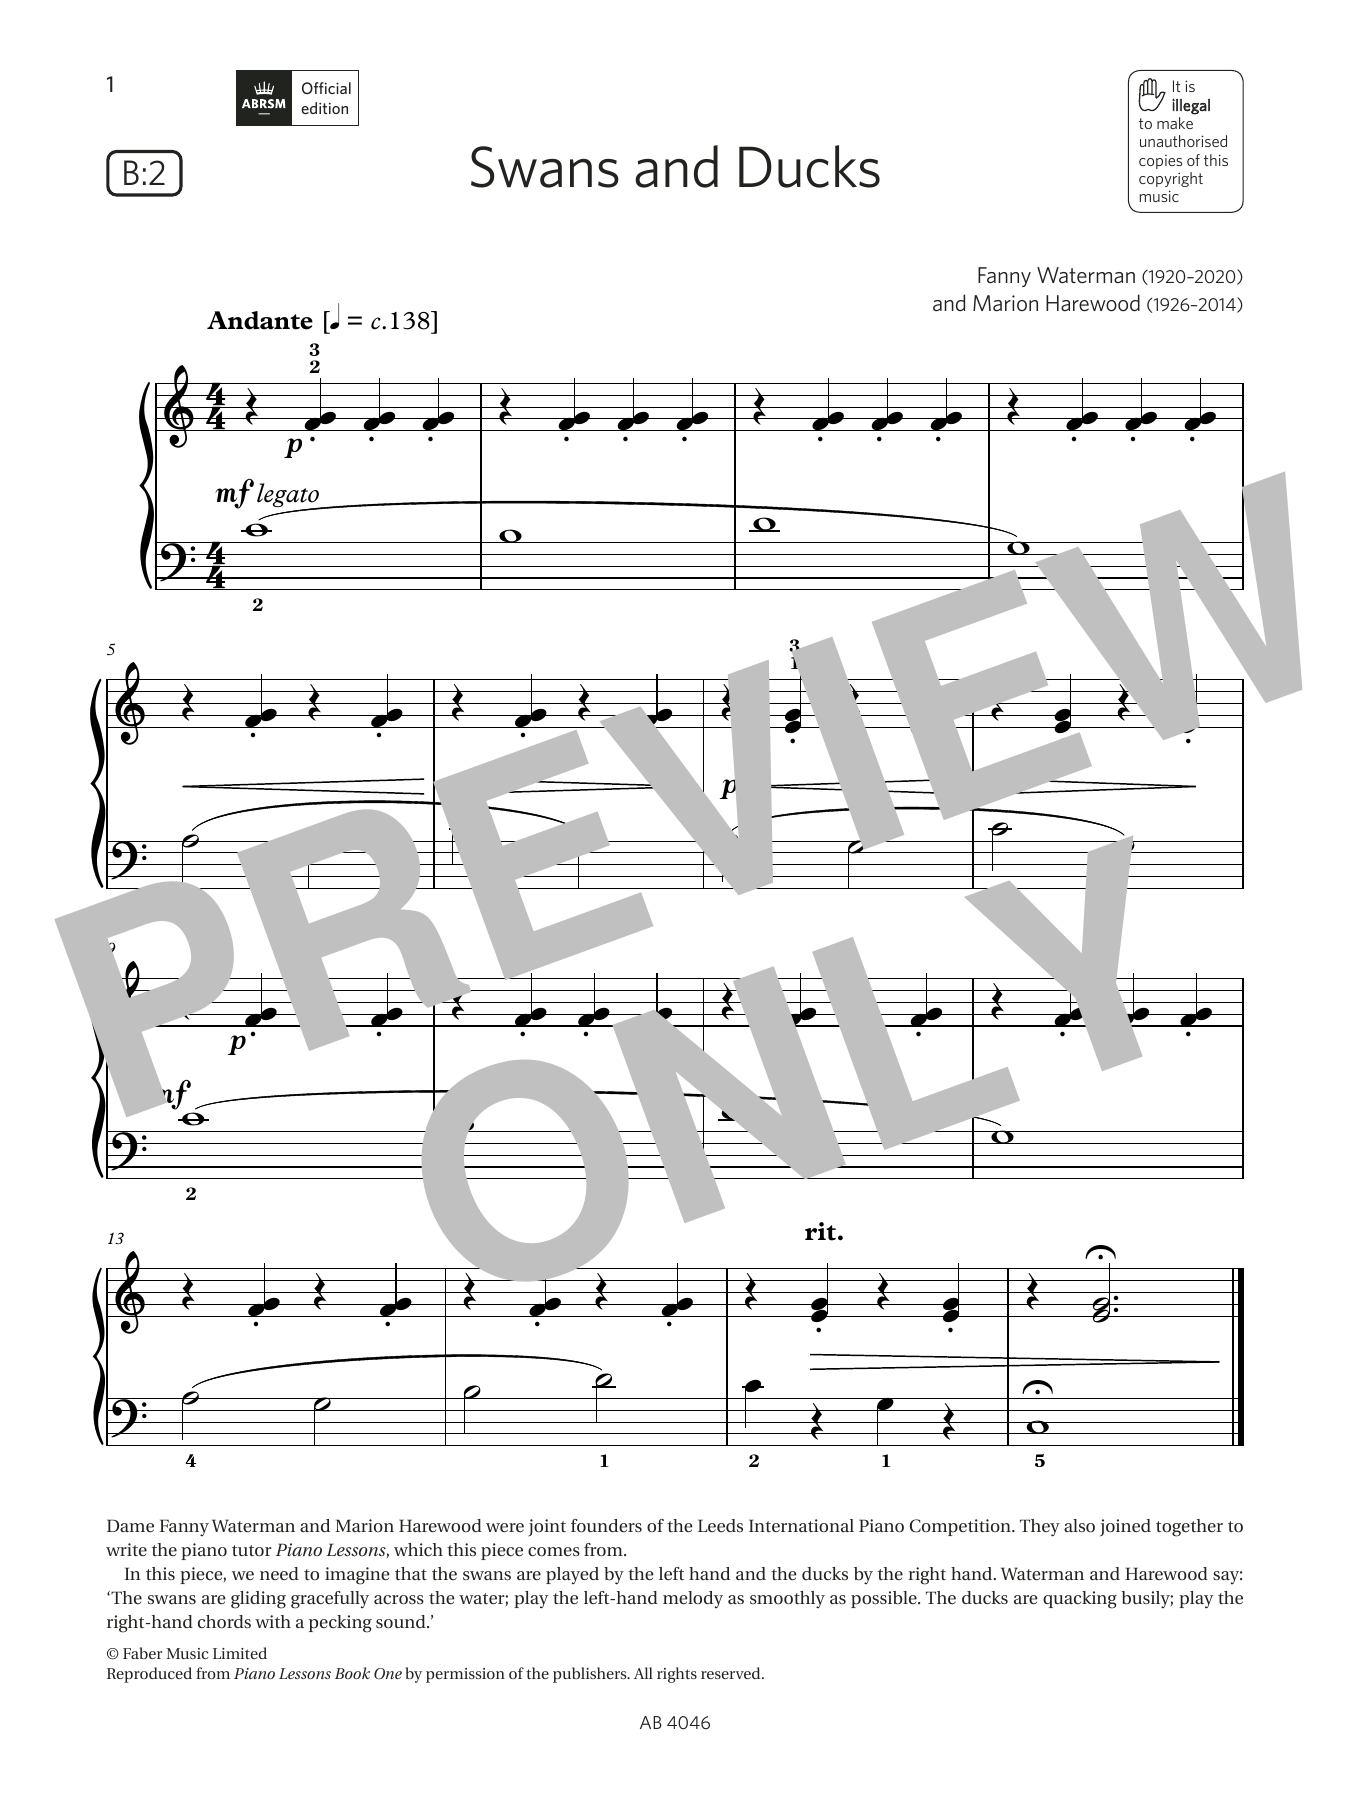 Download Fanny Waterman & Marion Harewood Swans and Ducks (Grade Initial, list B2 Sheet Music